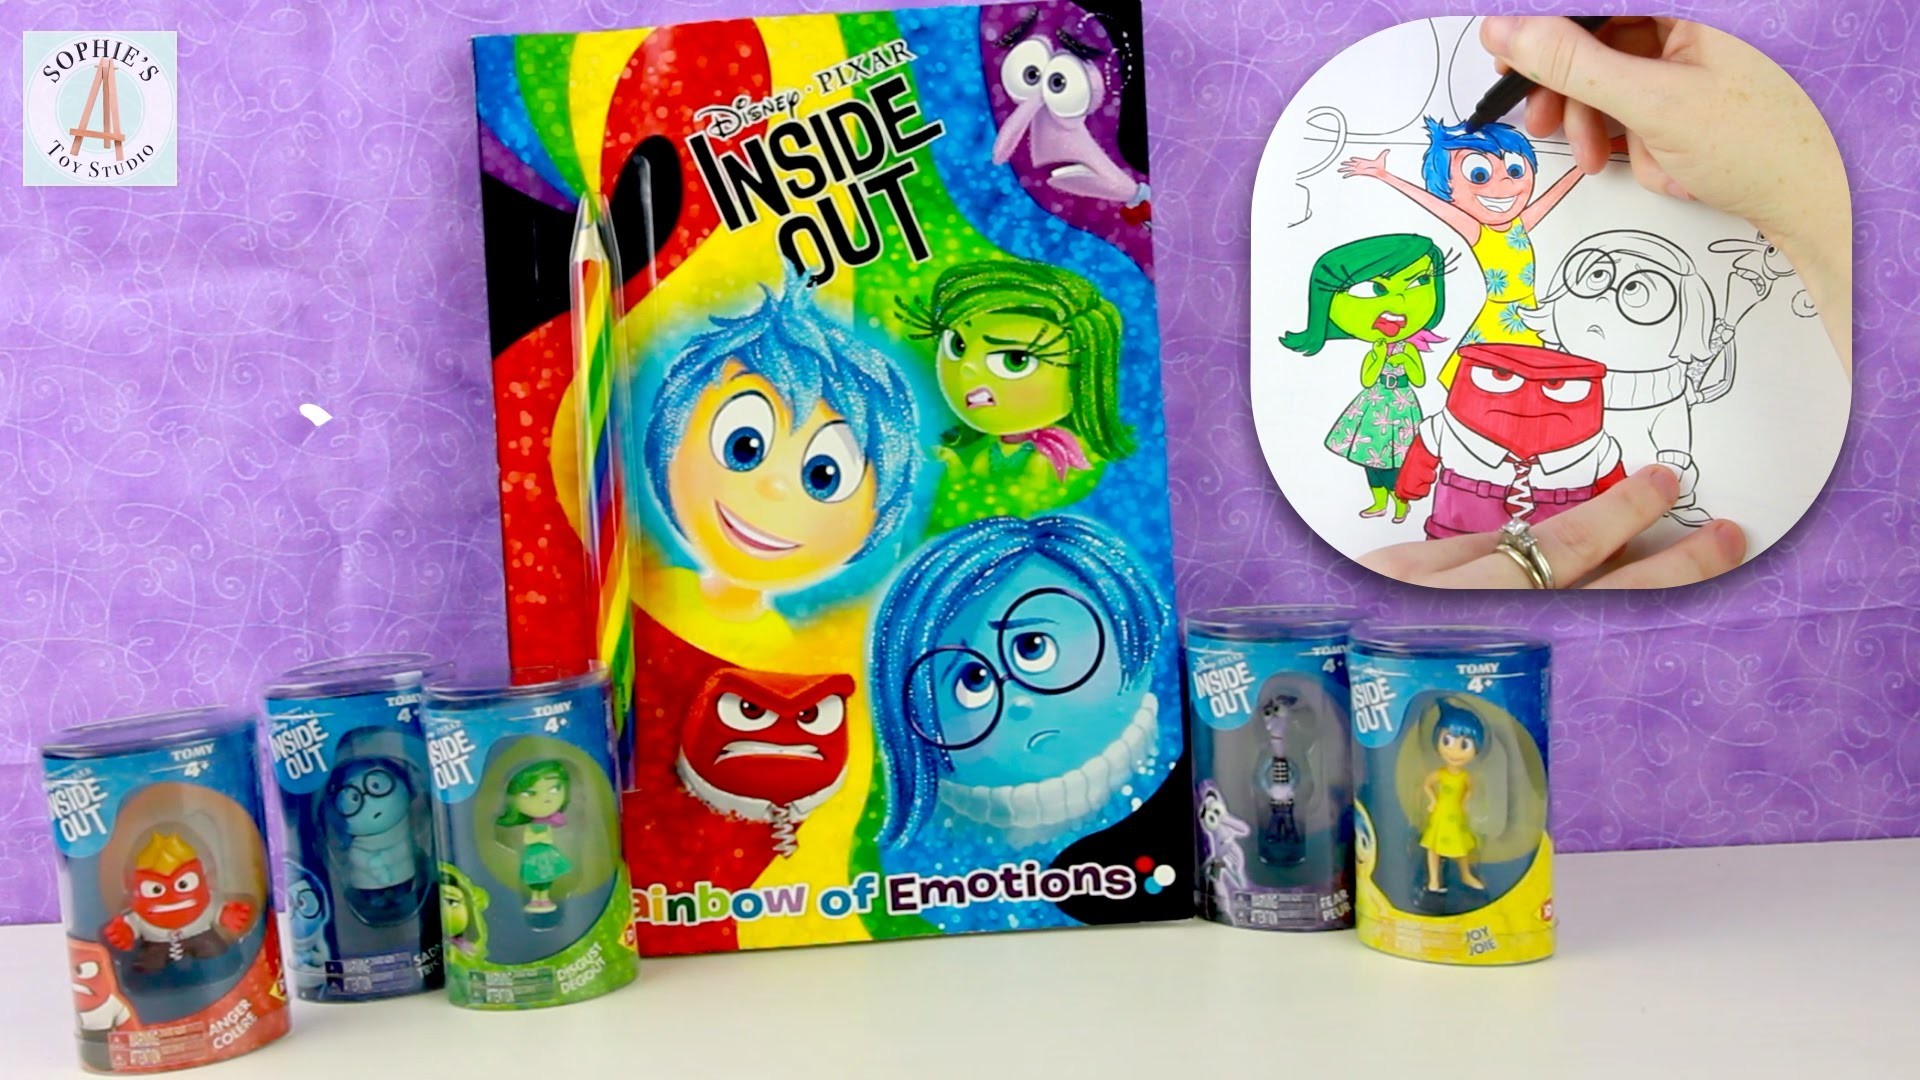 1920x1080 Inside Out Cute Emotions Toys & Coloring Book - Coloring Joy, Anger, Fear,  Sadness & Disgust - YouTube